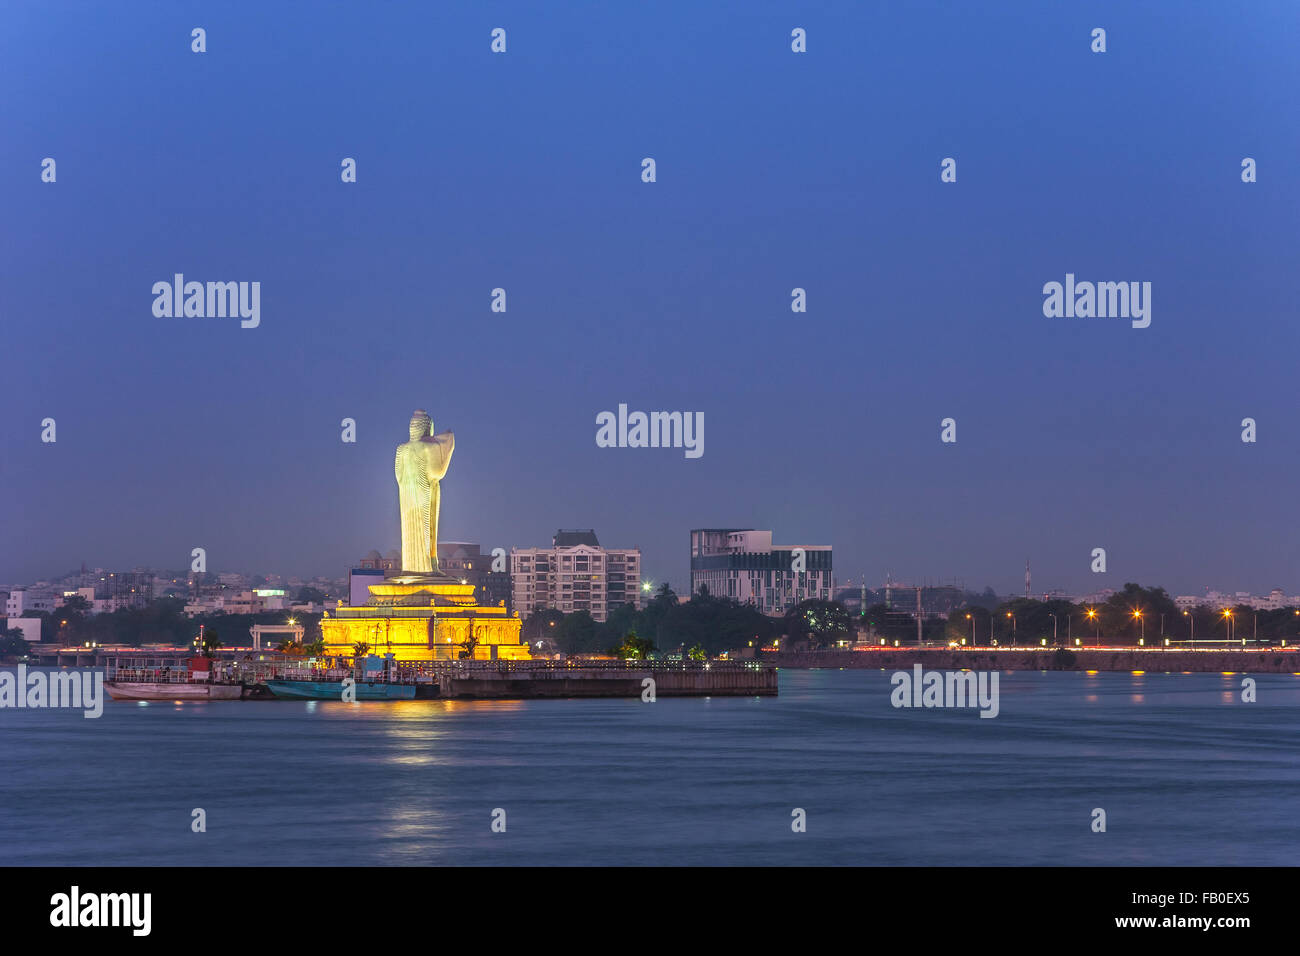 monolithic statue of the Gautam Buddha in the middle of the lake Hussain Sagar , India Stock Photo